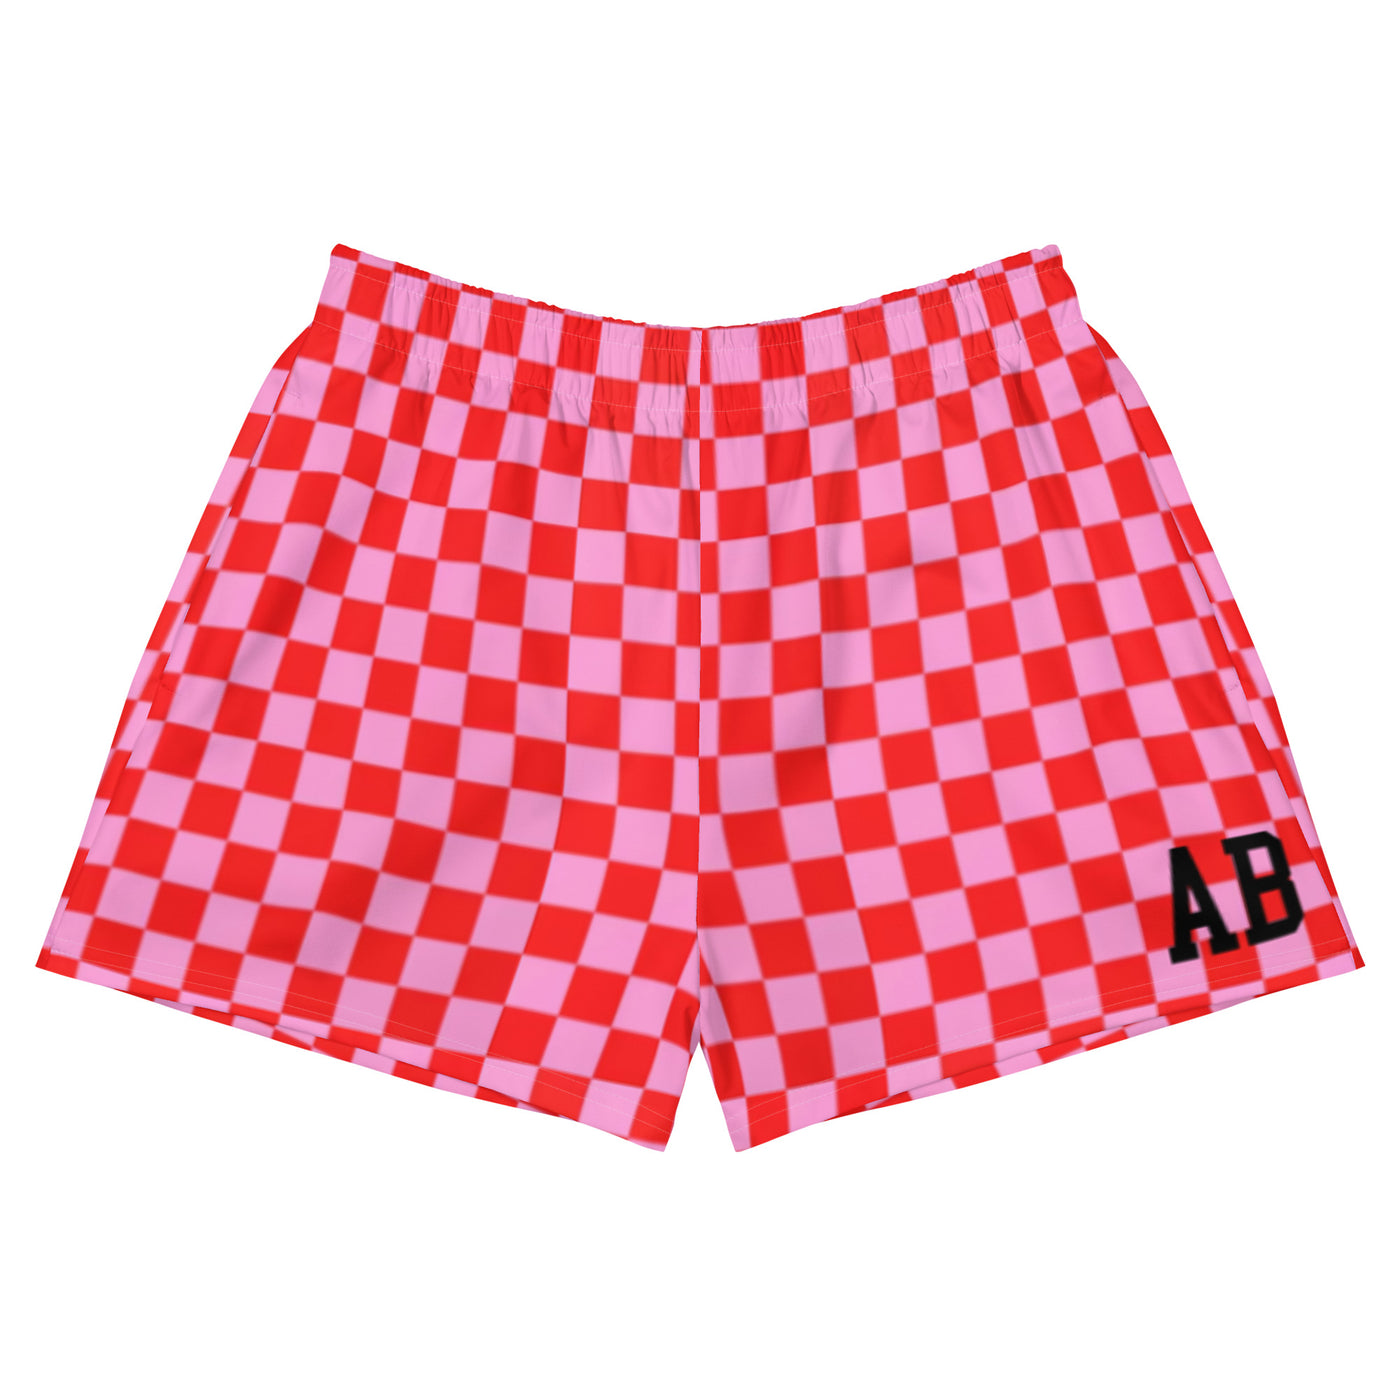 Initialed 'Pink Check' Women’s Athletic Shorts